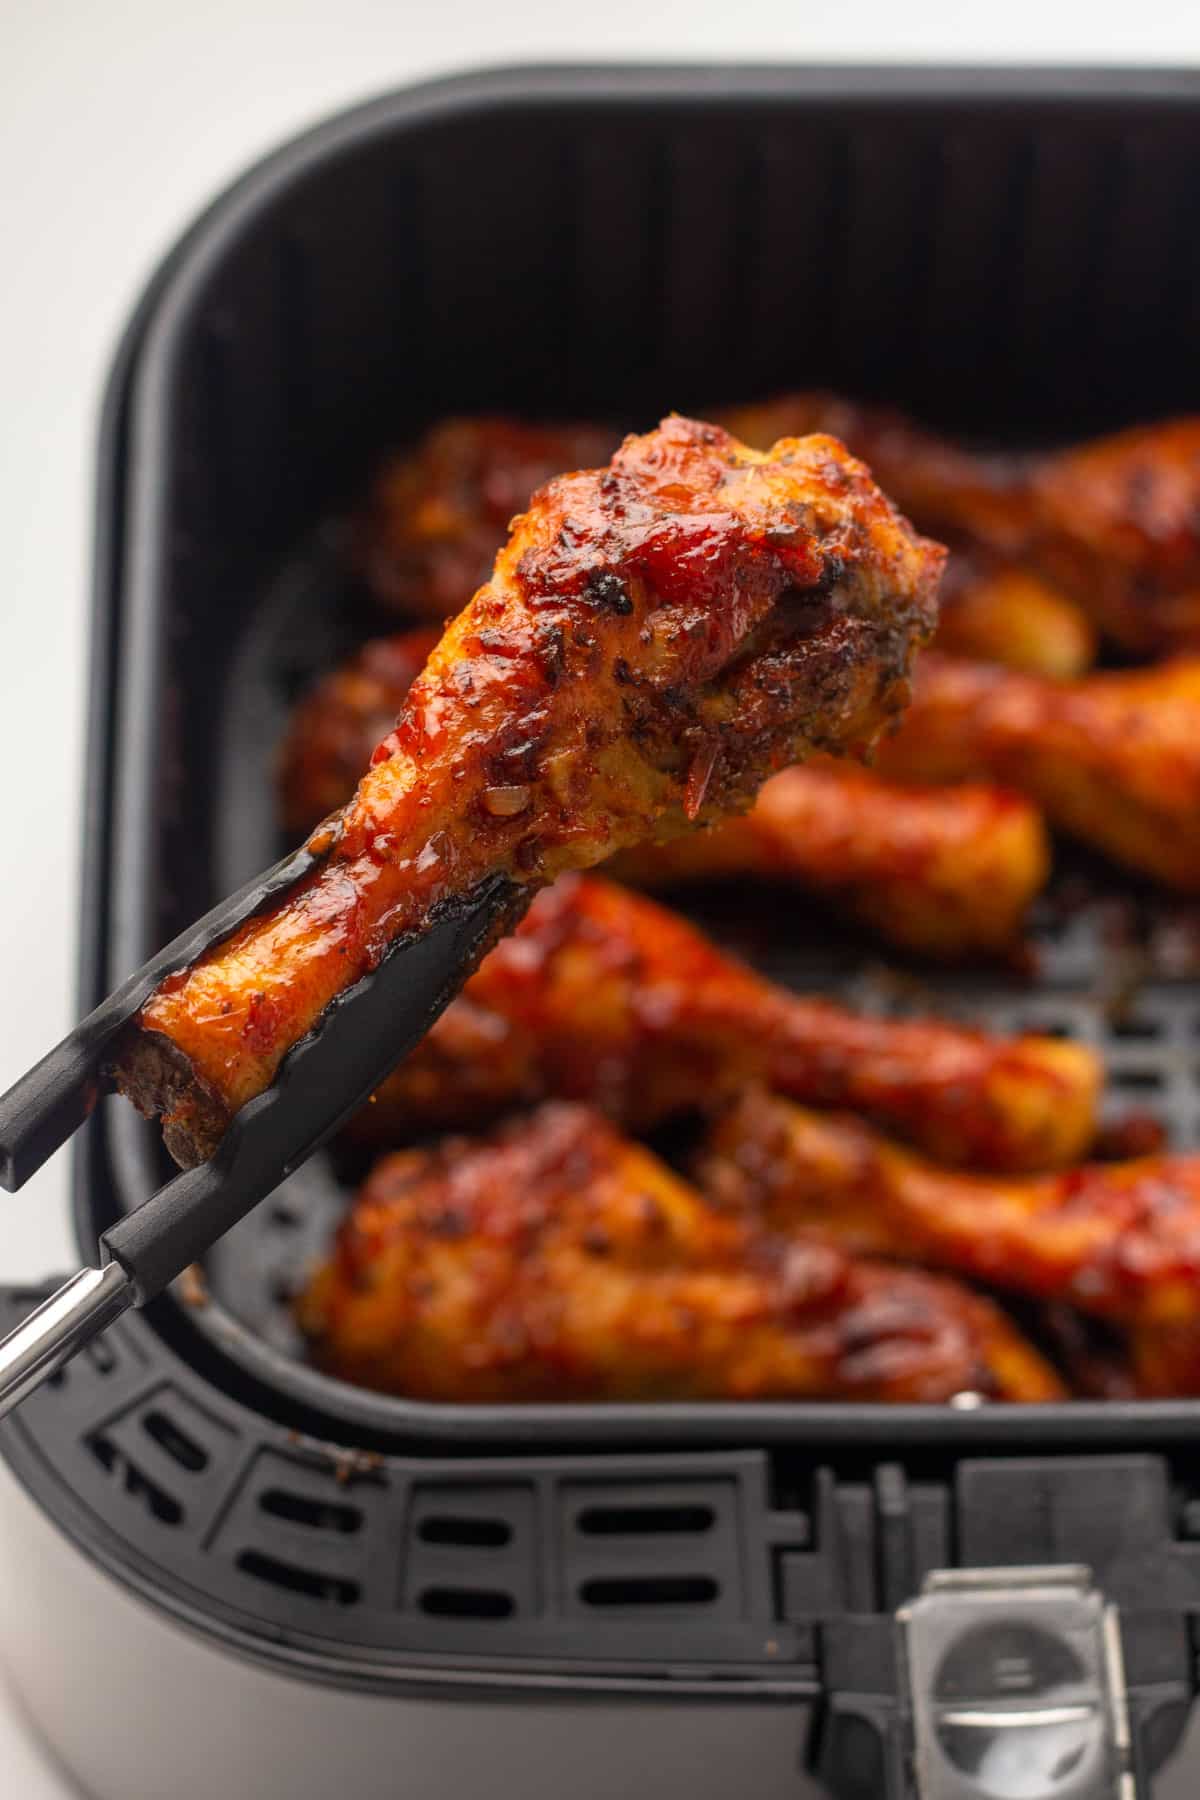 tongs lifting a bbq chicken leg from the air fryer basket